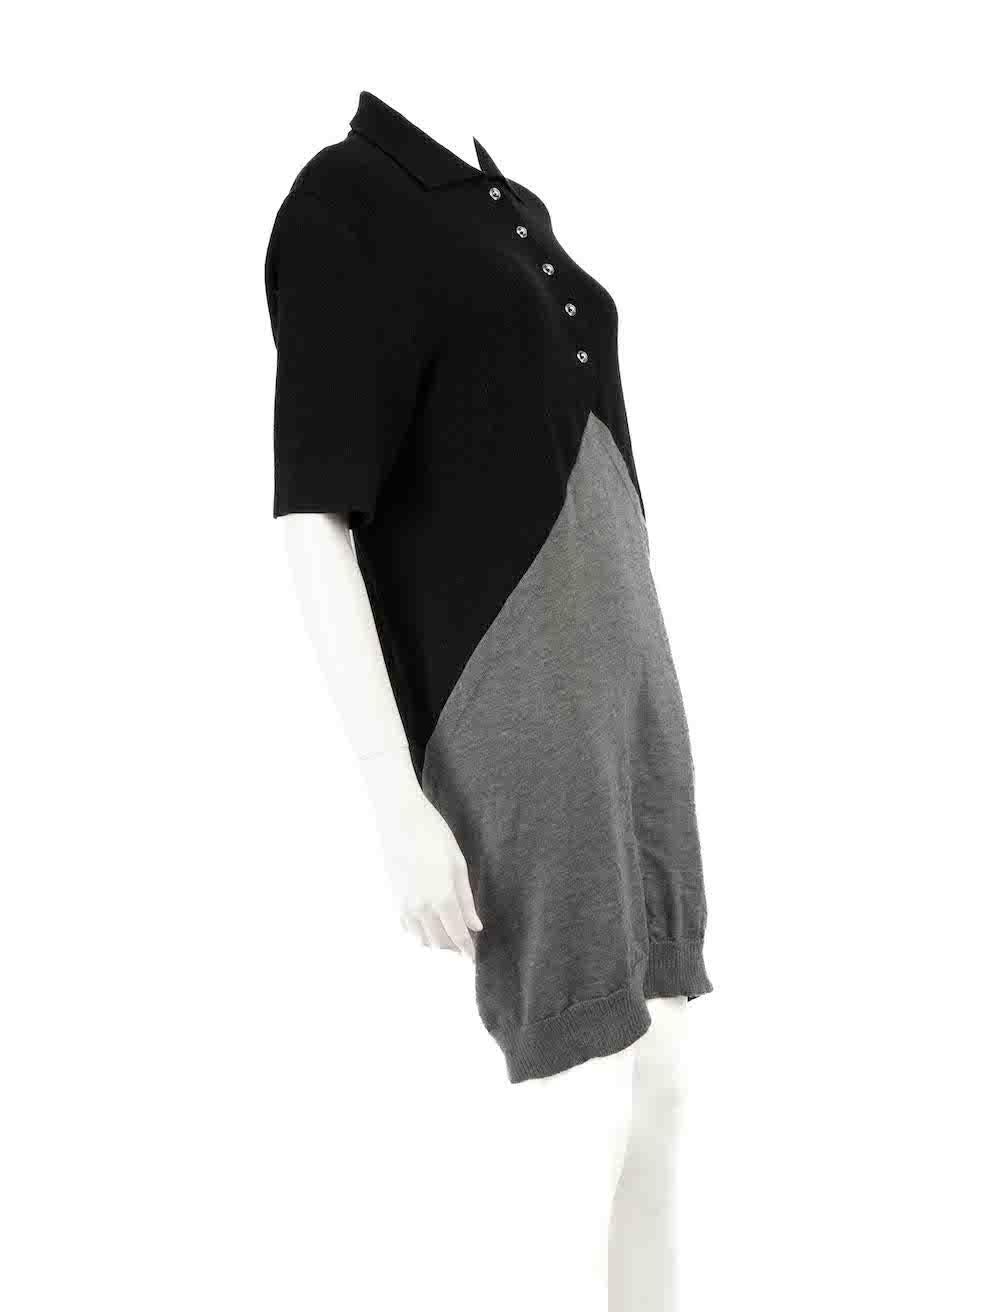 CONDITION is Very good. Minimal wear to dress is evident. Minimal wear to the rear neckline lining with the brand label having come detached on one side on this used Balenciaga designer resale item.
 
 
 
 Details
 
 
 Grey
 
 Wool
 
 Knit dress
 
